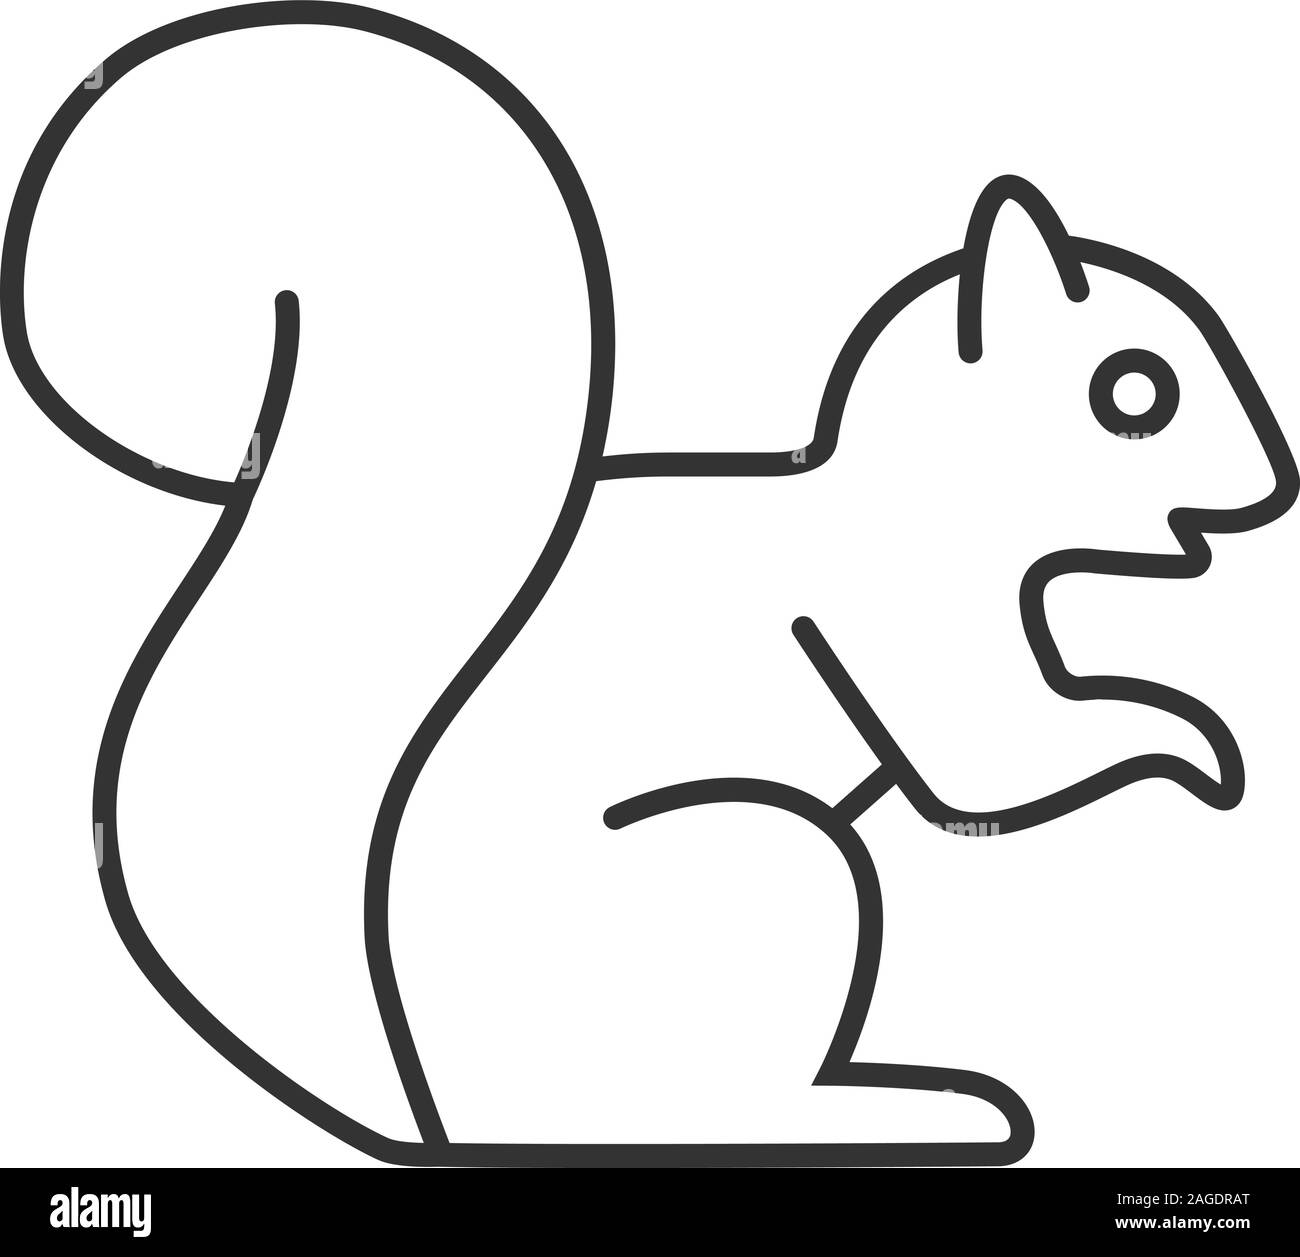 22 Fun and Easy Squirrel Drawings - Cool Kids Crafts